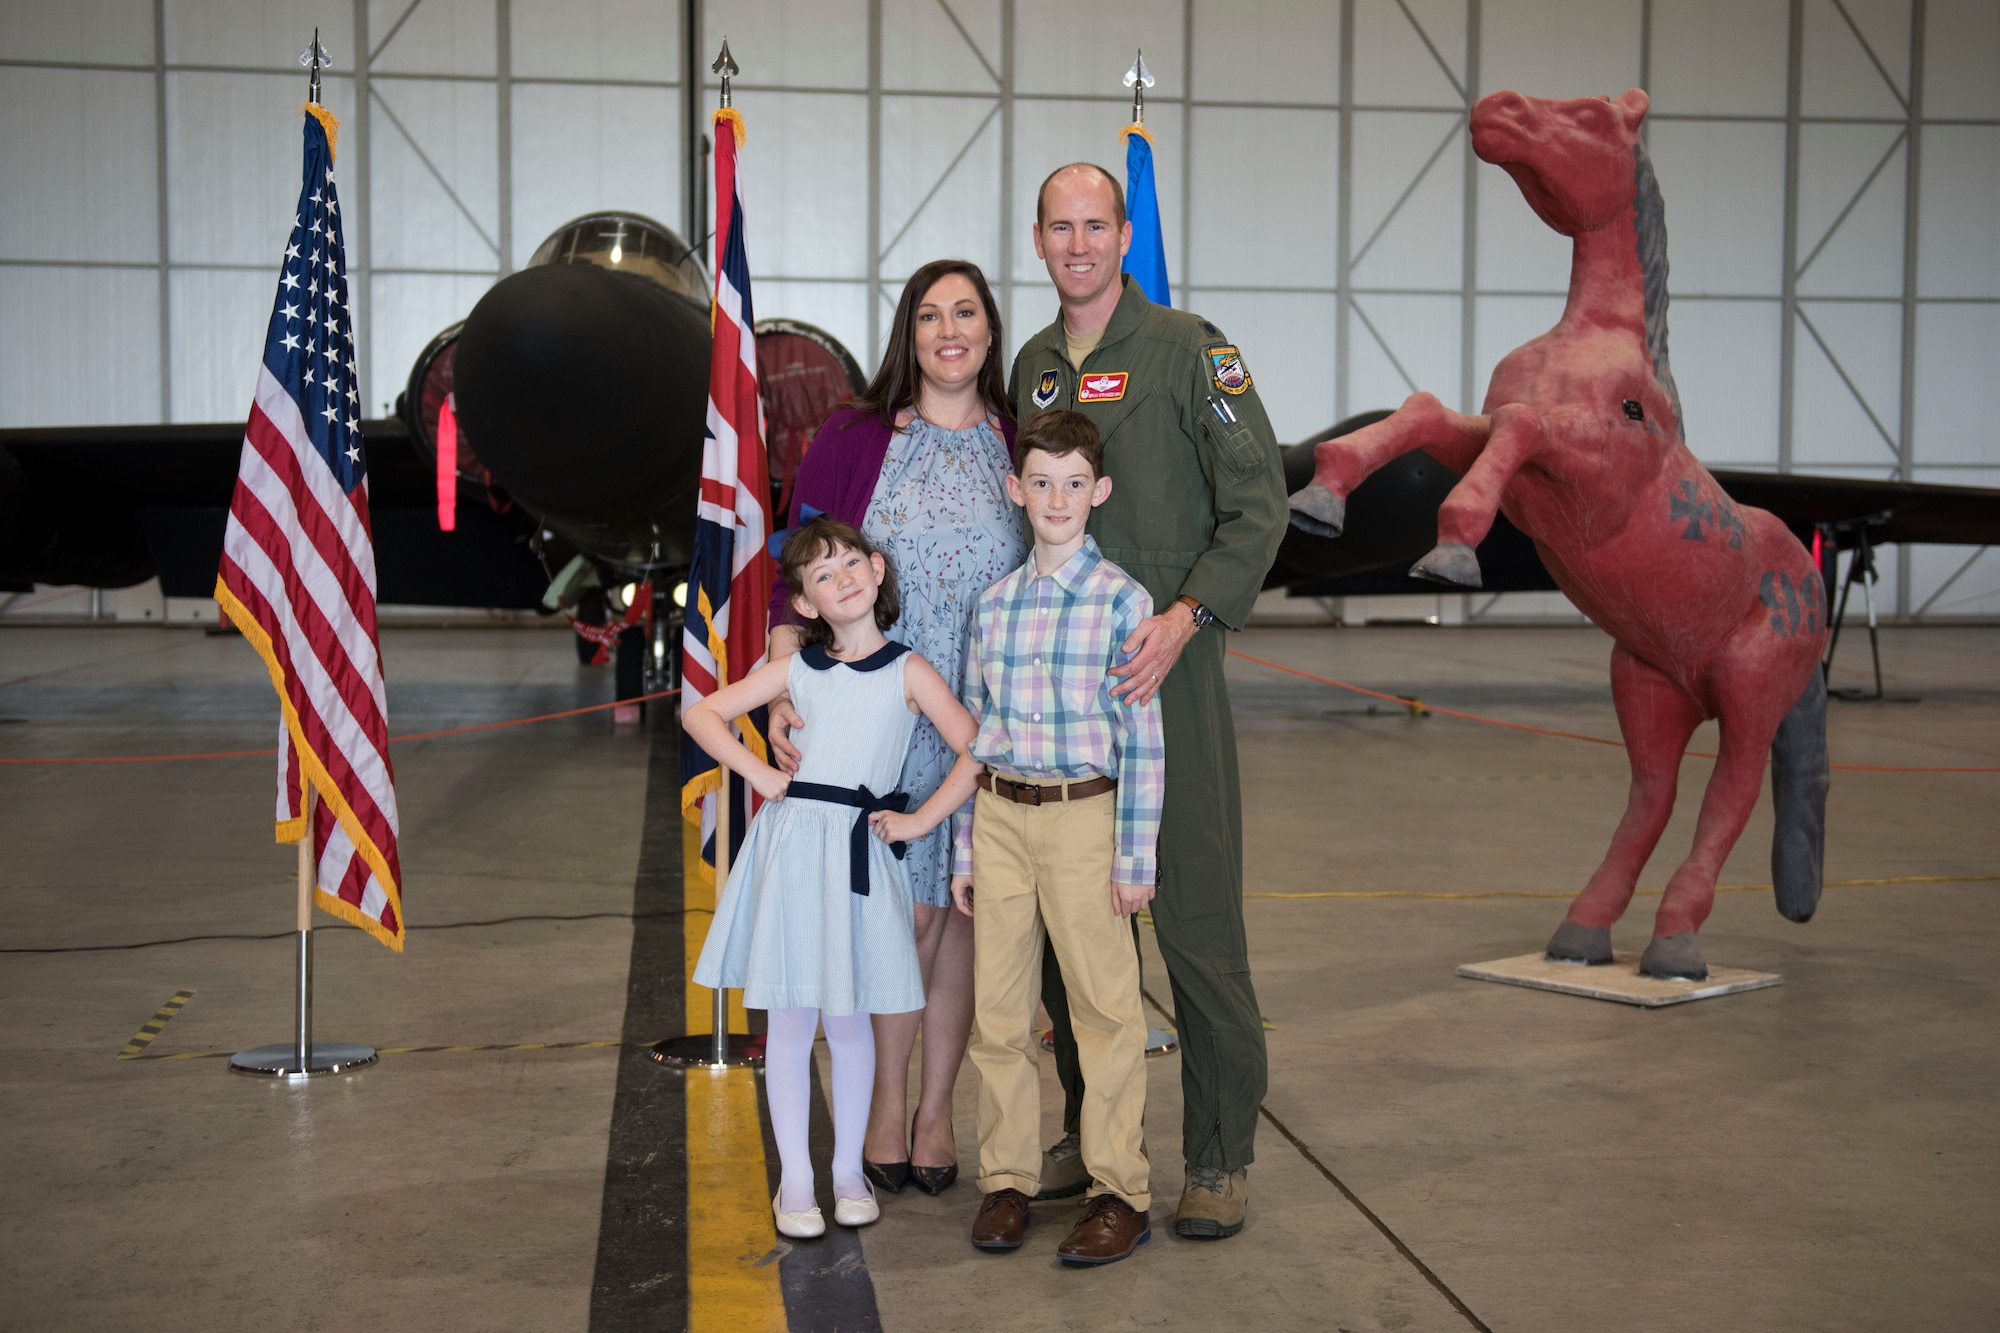 U.S. Air Force Lt. Col. Brian Staniszewski, 99th Expeditionary Reconnaissance Squadron commander, poses for a family photo during a change of command ceremony, at RAF Fairford, England, June 24, 2020. The change of command ceremony is a military tradition that represents a formal transfer of a unit’s authority and responsibility from one commander to another. (U.S. Air Force photo by Airman 1st Class Jennifer Zima)